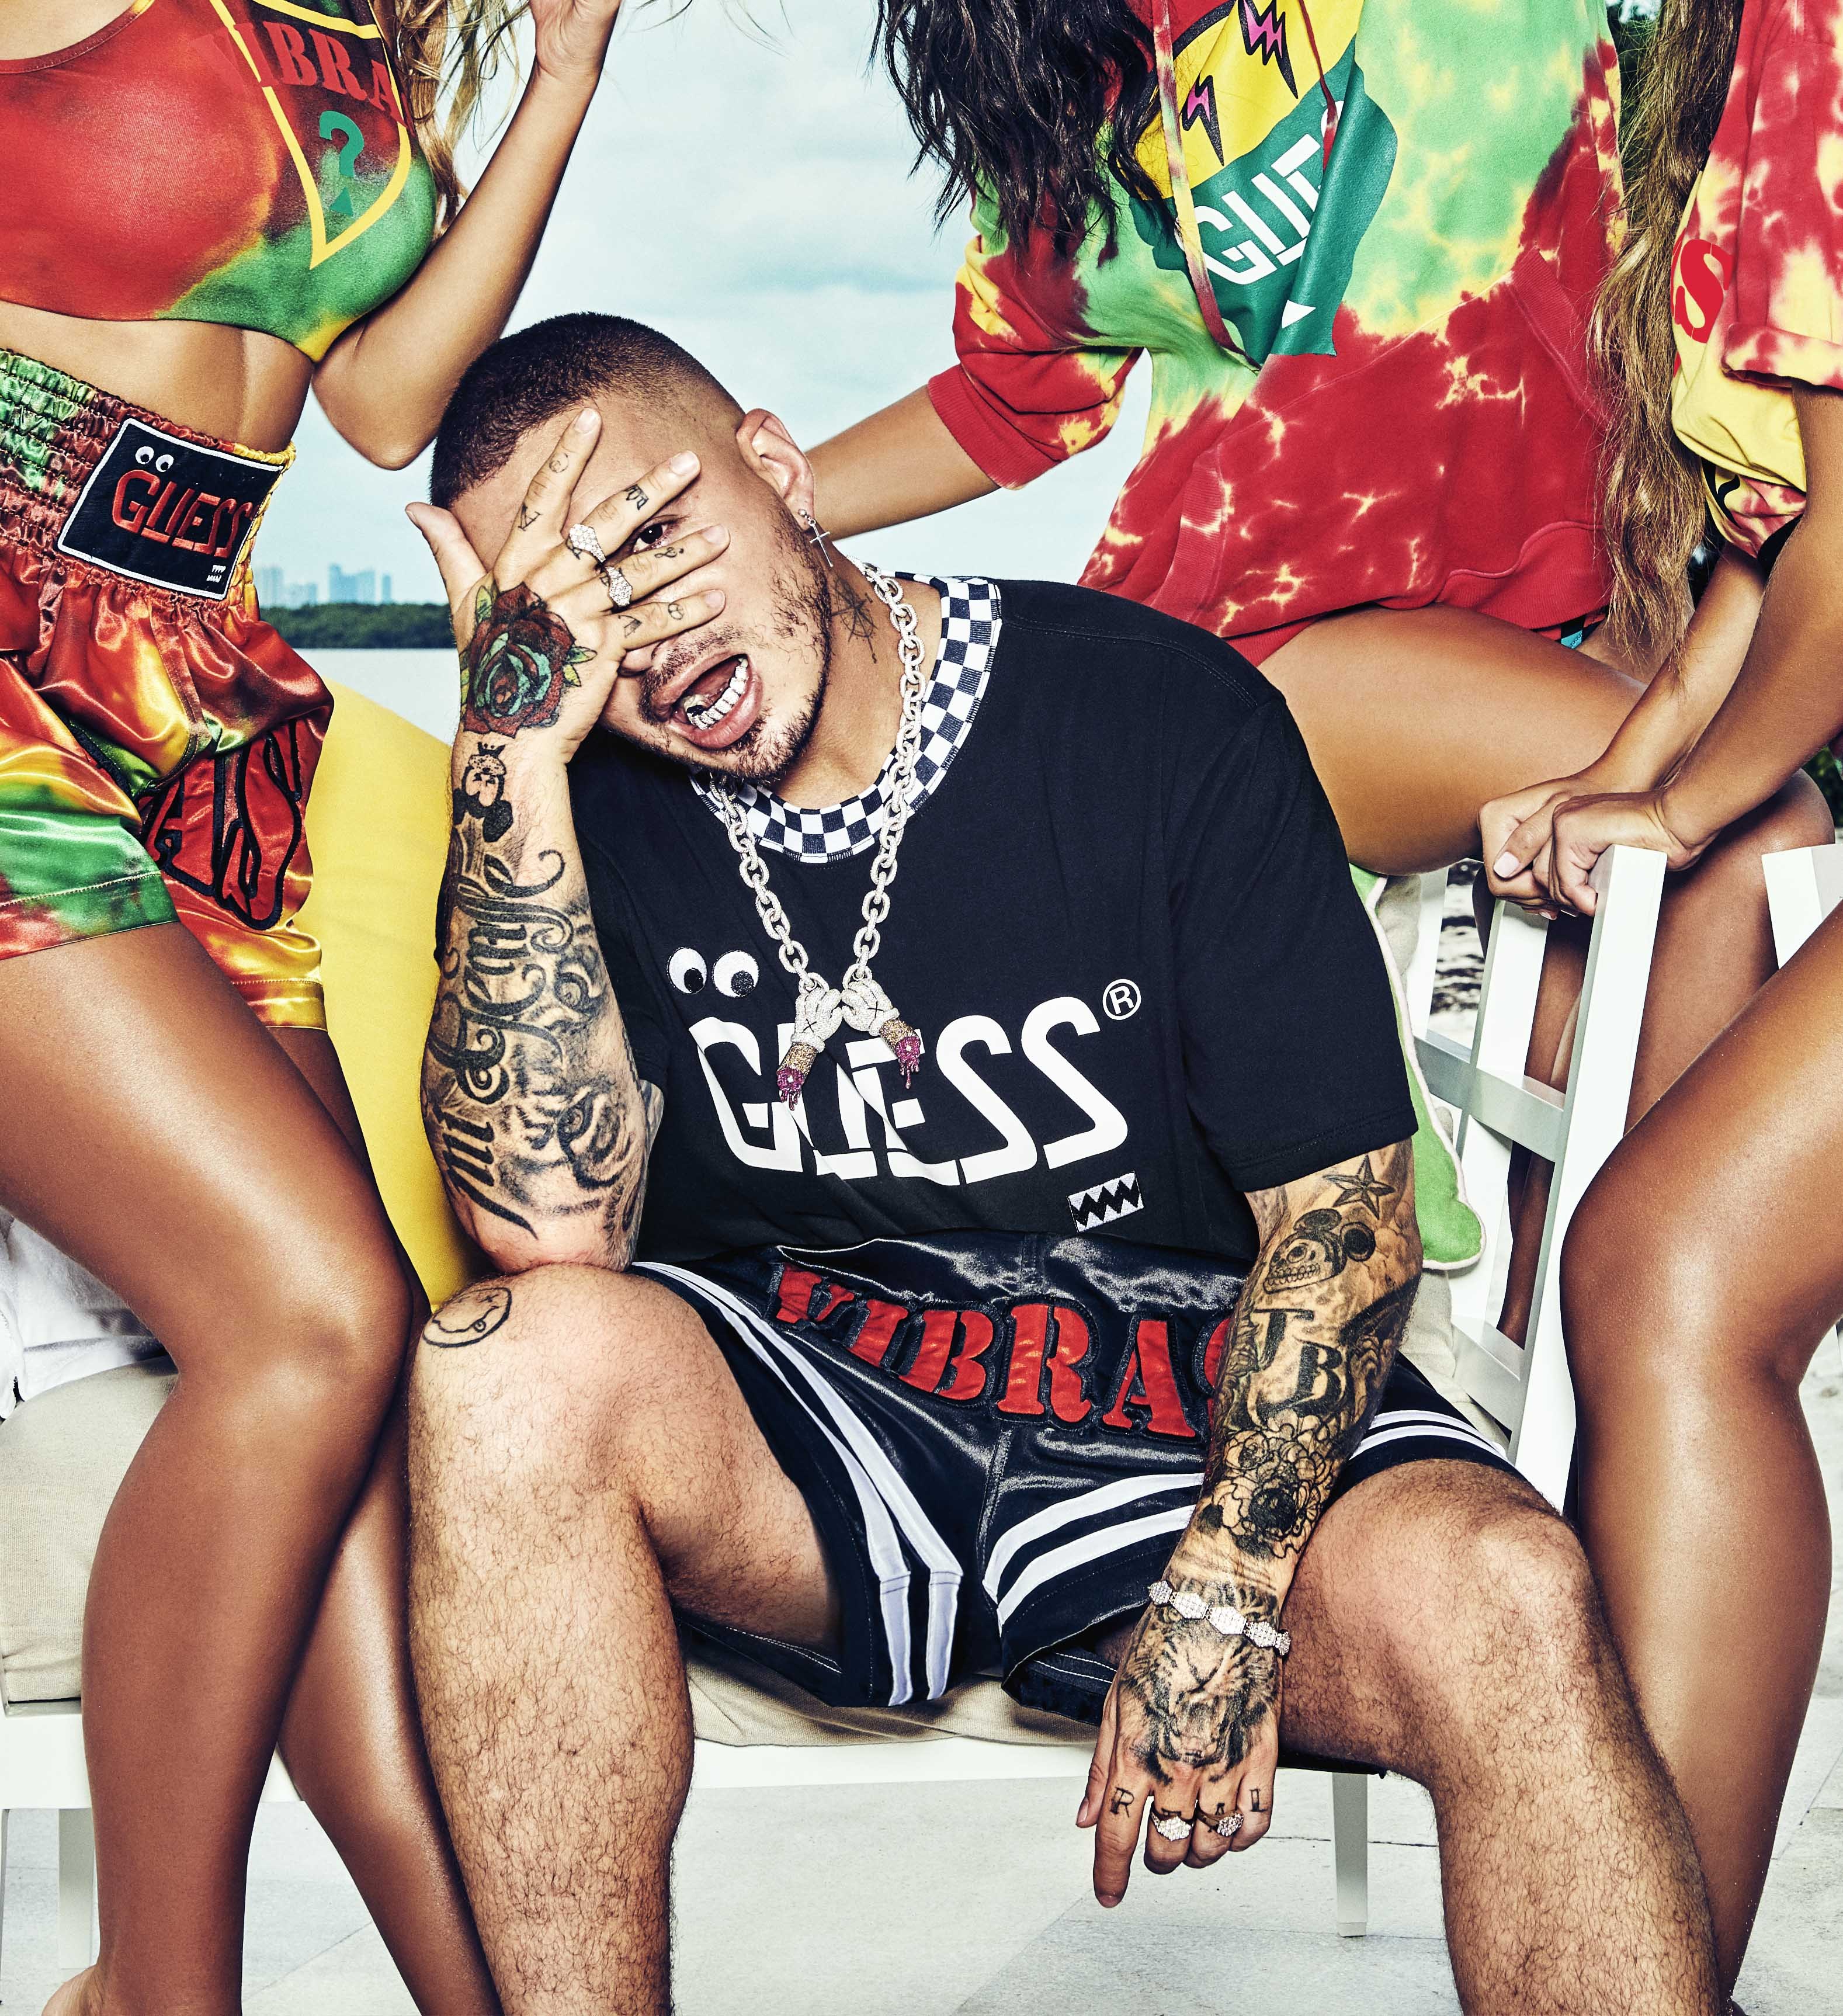 GUESS?, Inc. Announces the Return of Global Music Superstar J